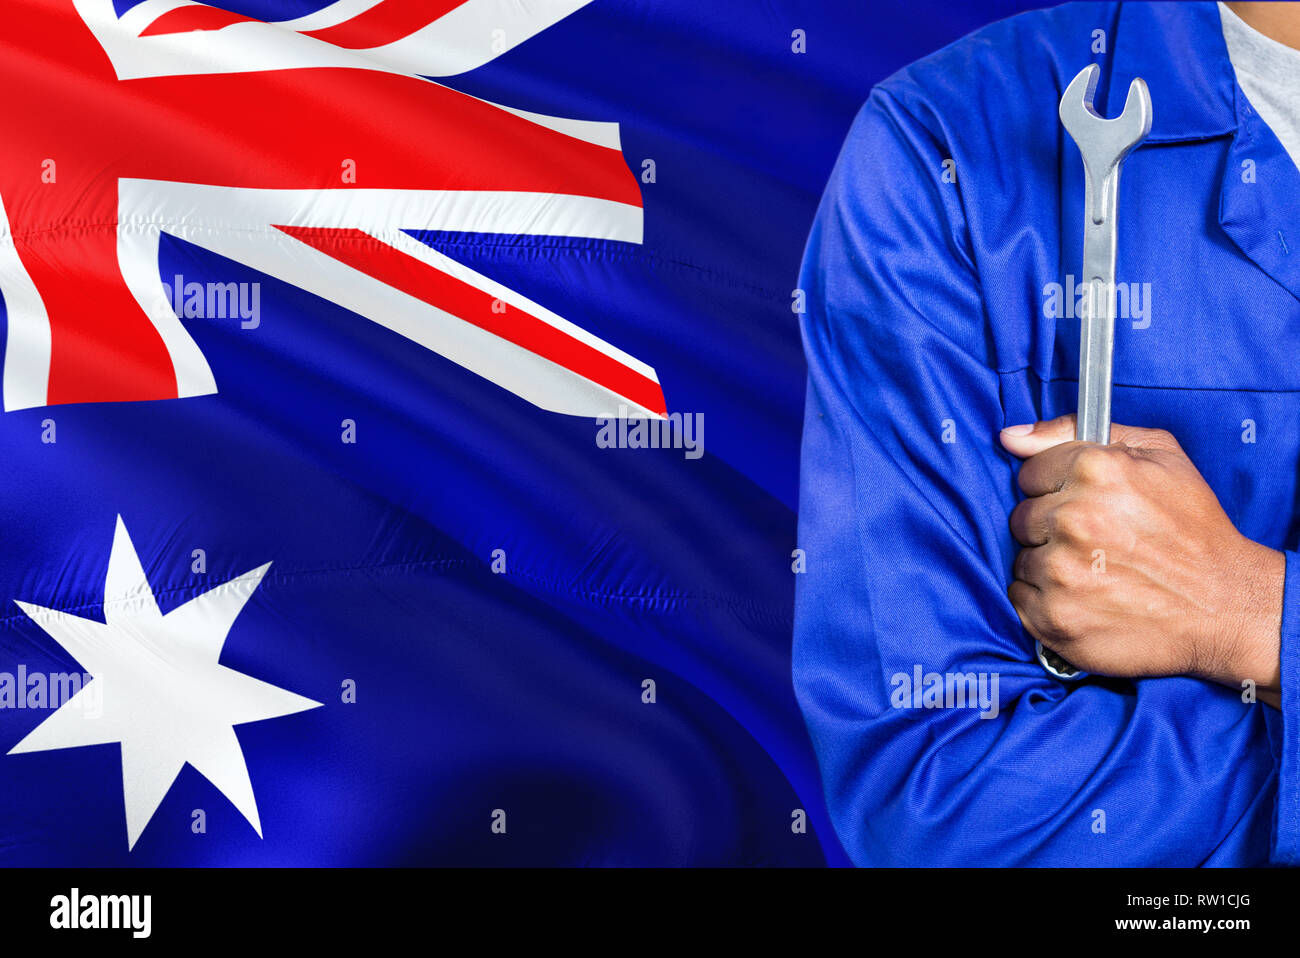 Australian Mechanic in blue uniform is holding wrench against waving Australia flag background. Crossed arms technician. Stock Photo